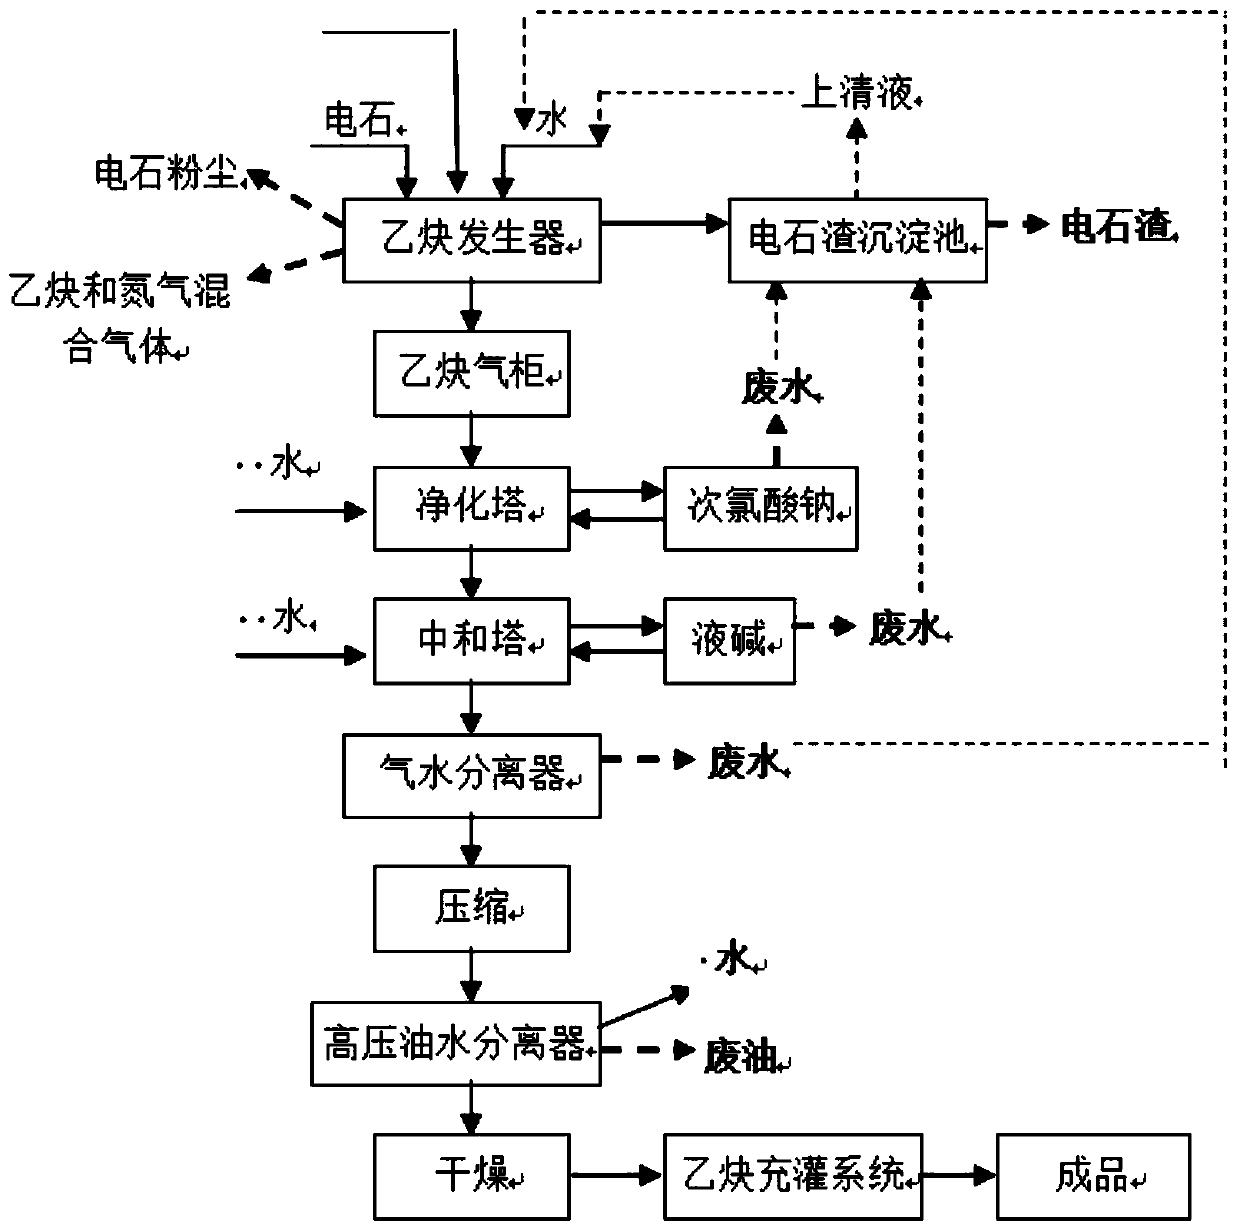 Novel high-purity acetylene purification production system and technological process thereof